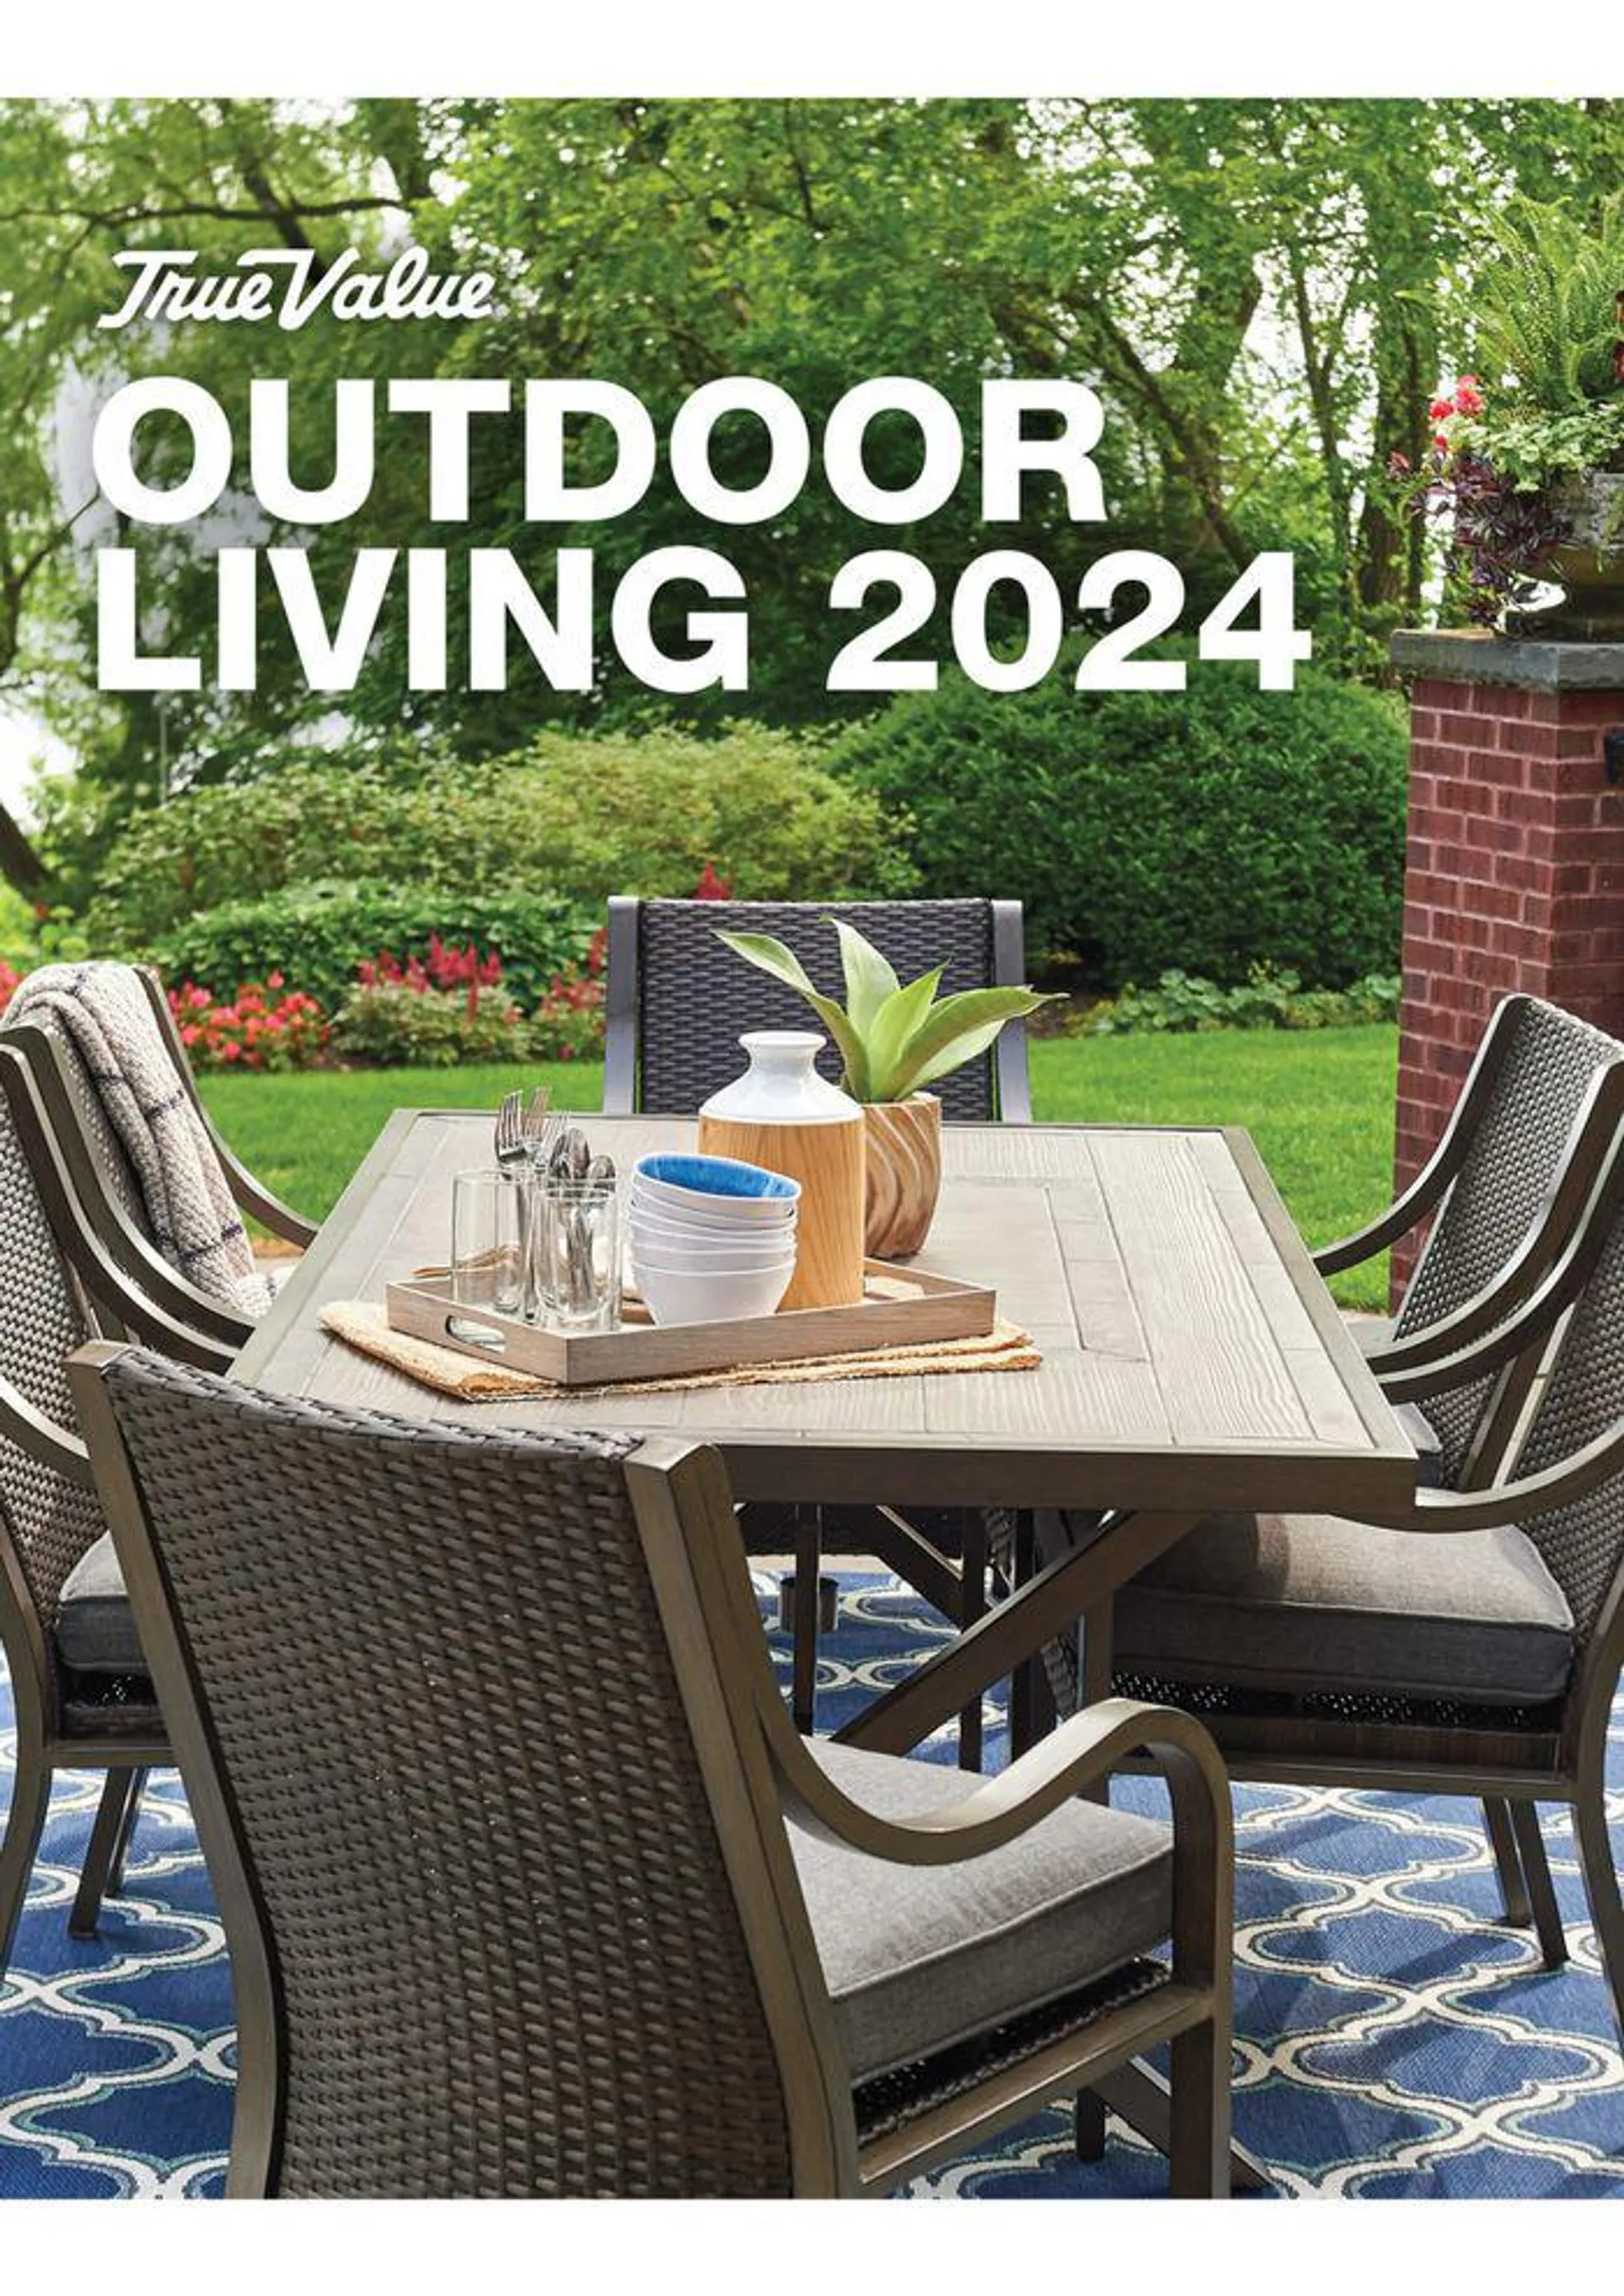 Weekly ad Outdoor Living 2024 from March 5 to August 31 2024 - Page 1